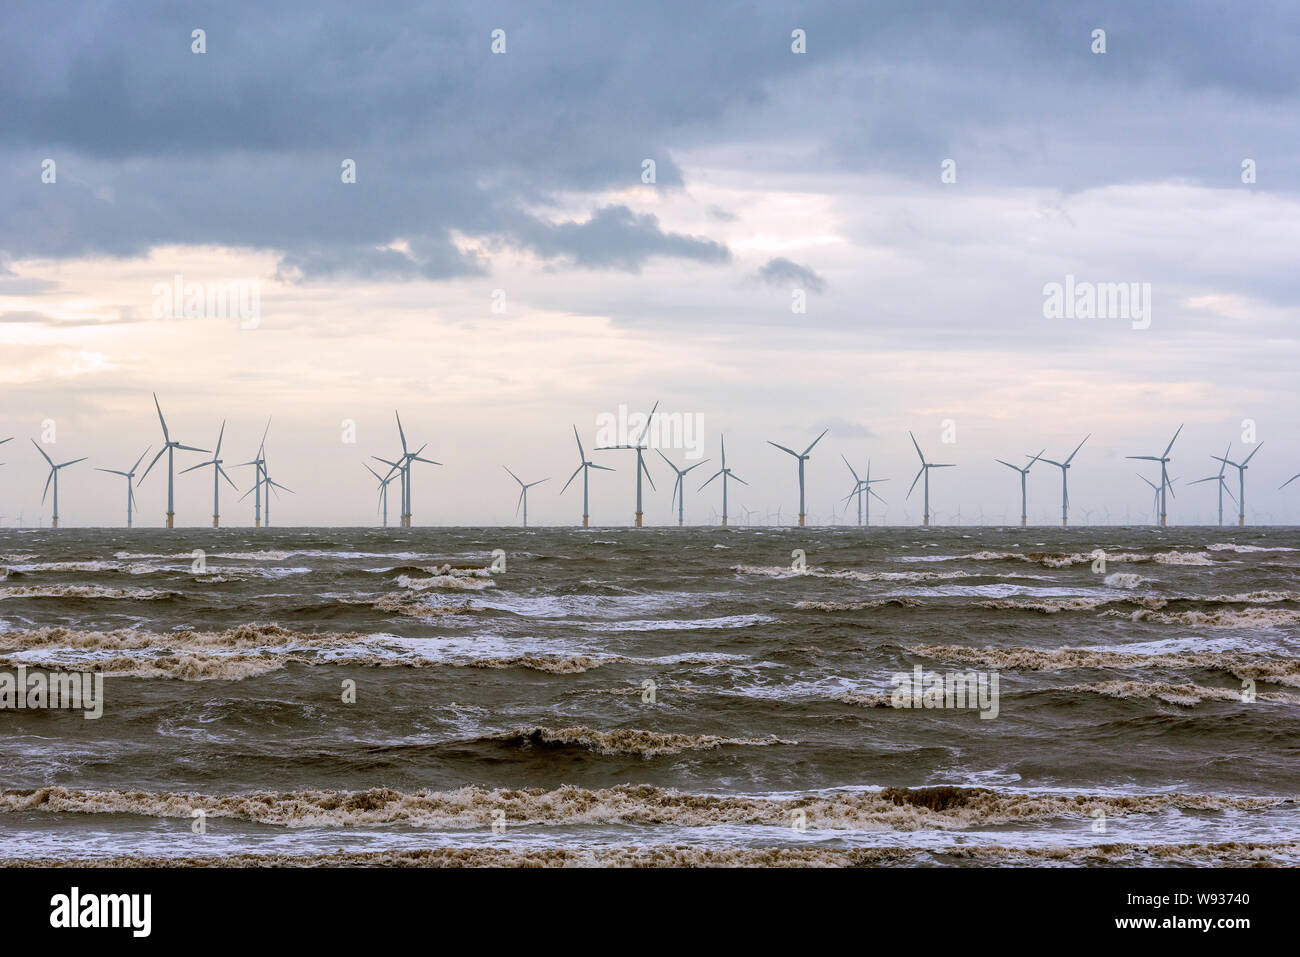 Windmills. Windpower. Liverpool Bay offshore windfarm. Clean green electricity. Stock Photo